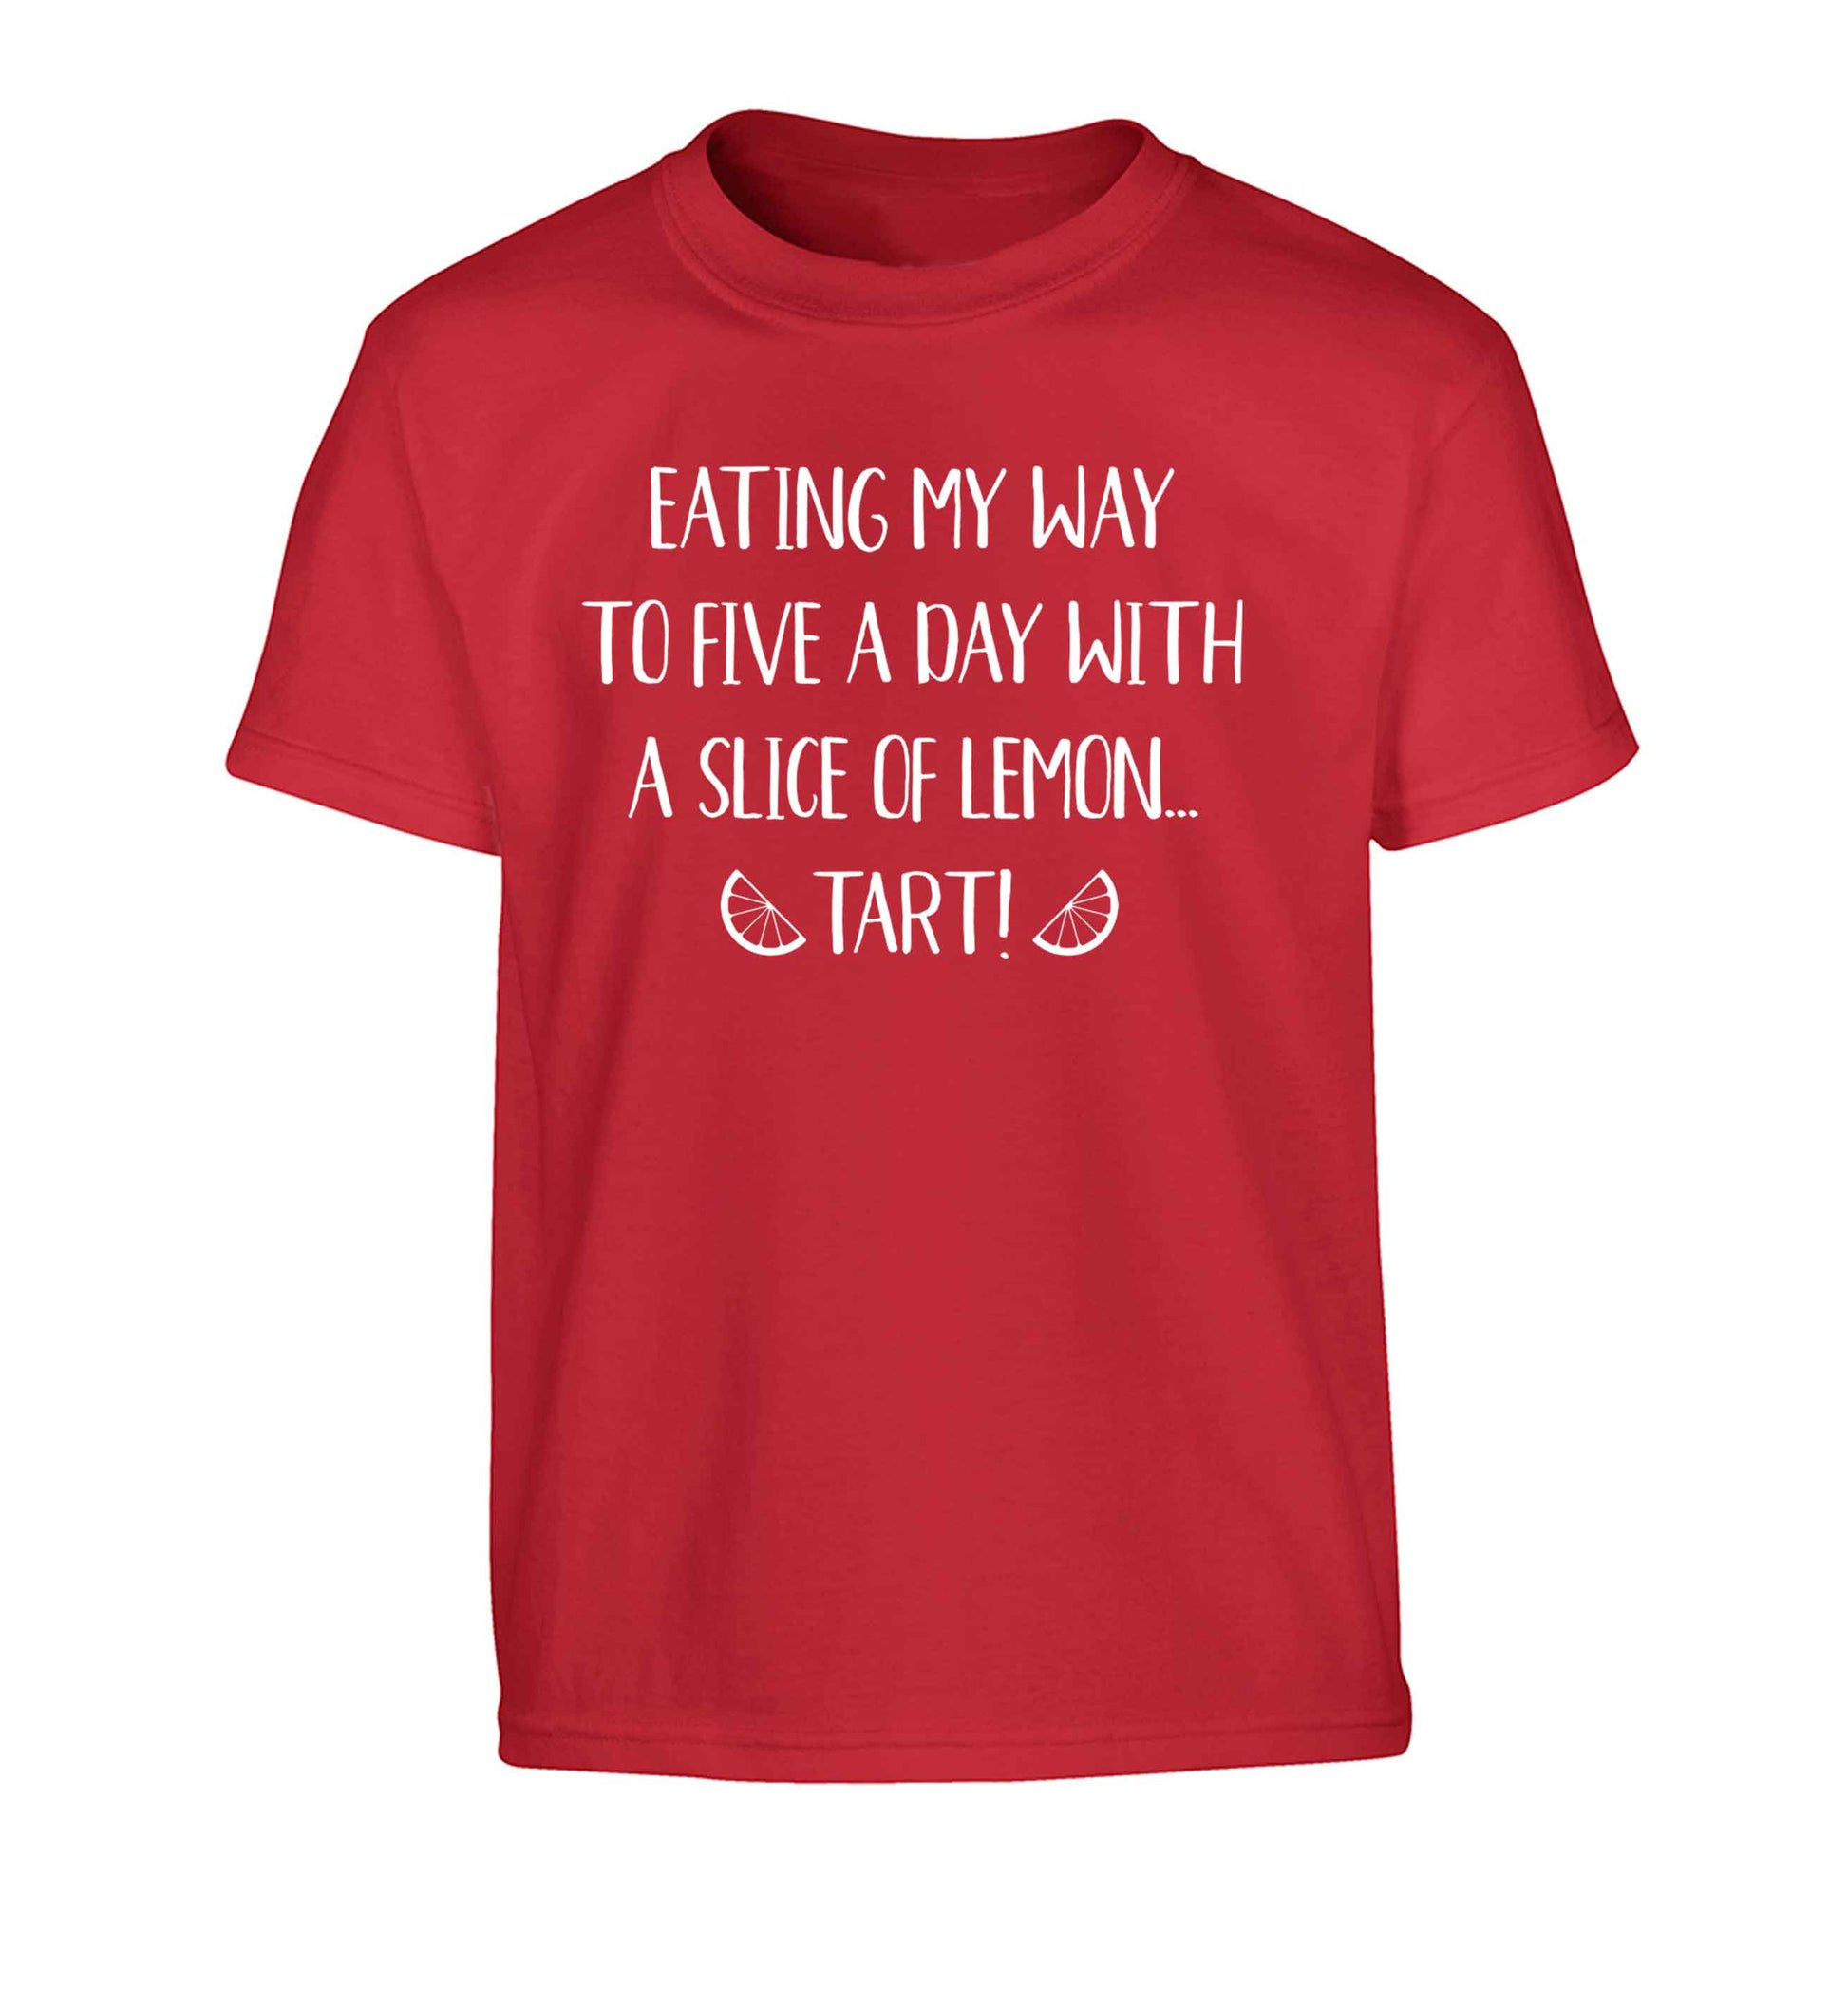 Eating my way to five a day with a slice of lemon tart Children's red Tshirt 12-13 Years